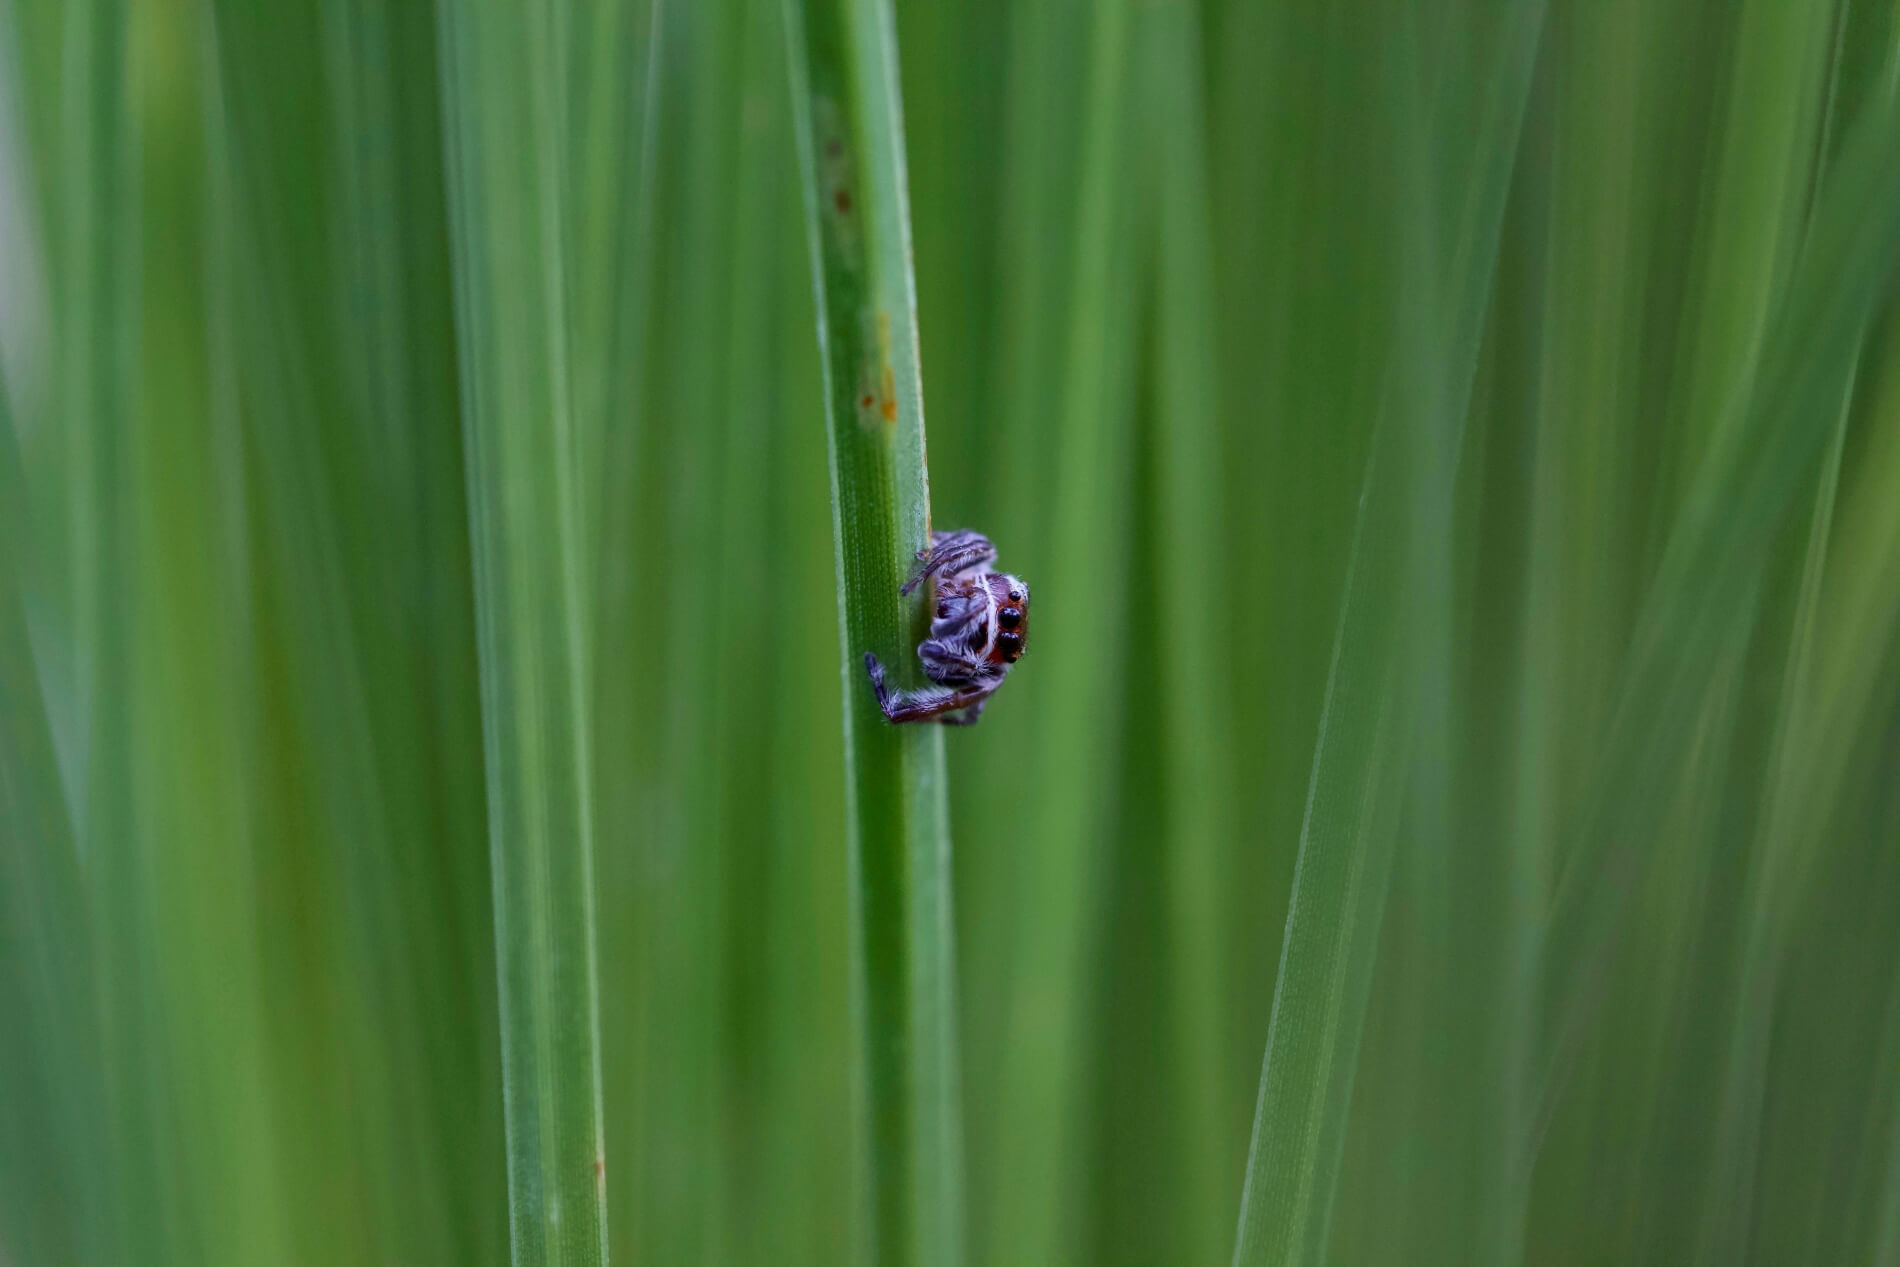 A small jumping spider on a green stem photographed by Holly Martin in 2020